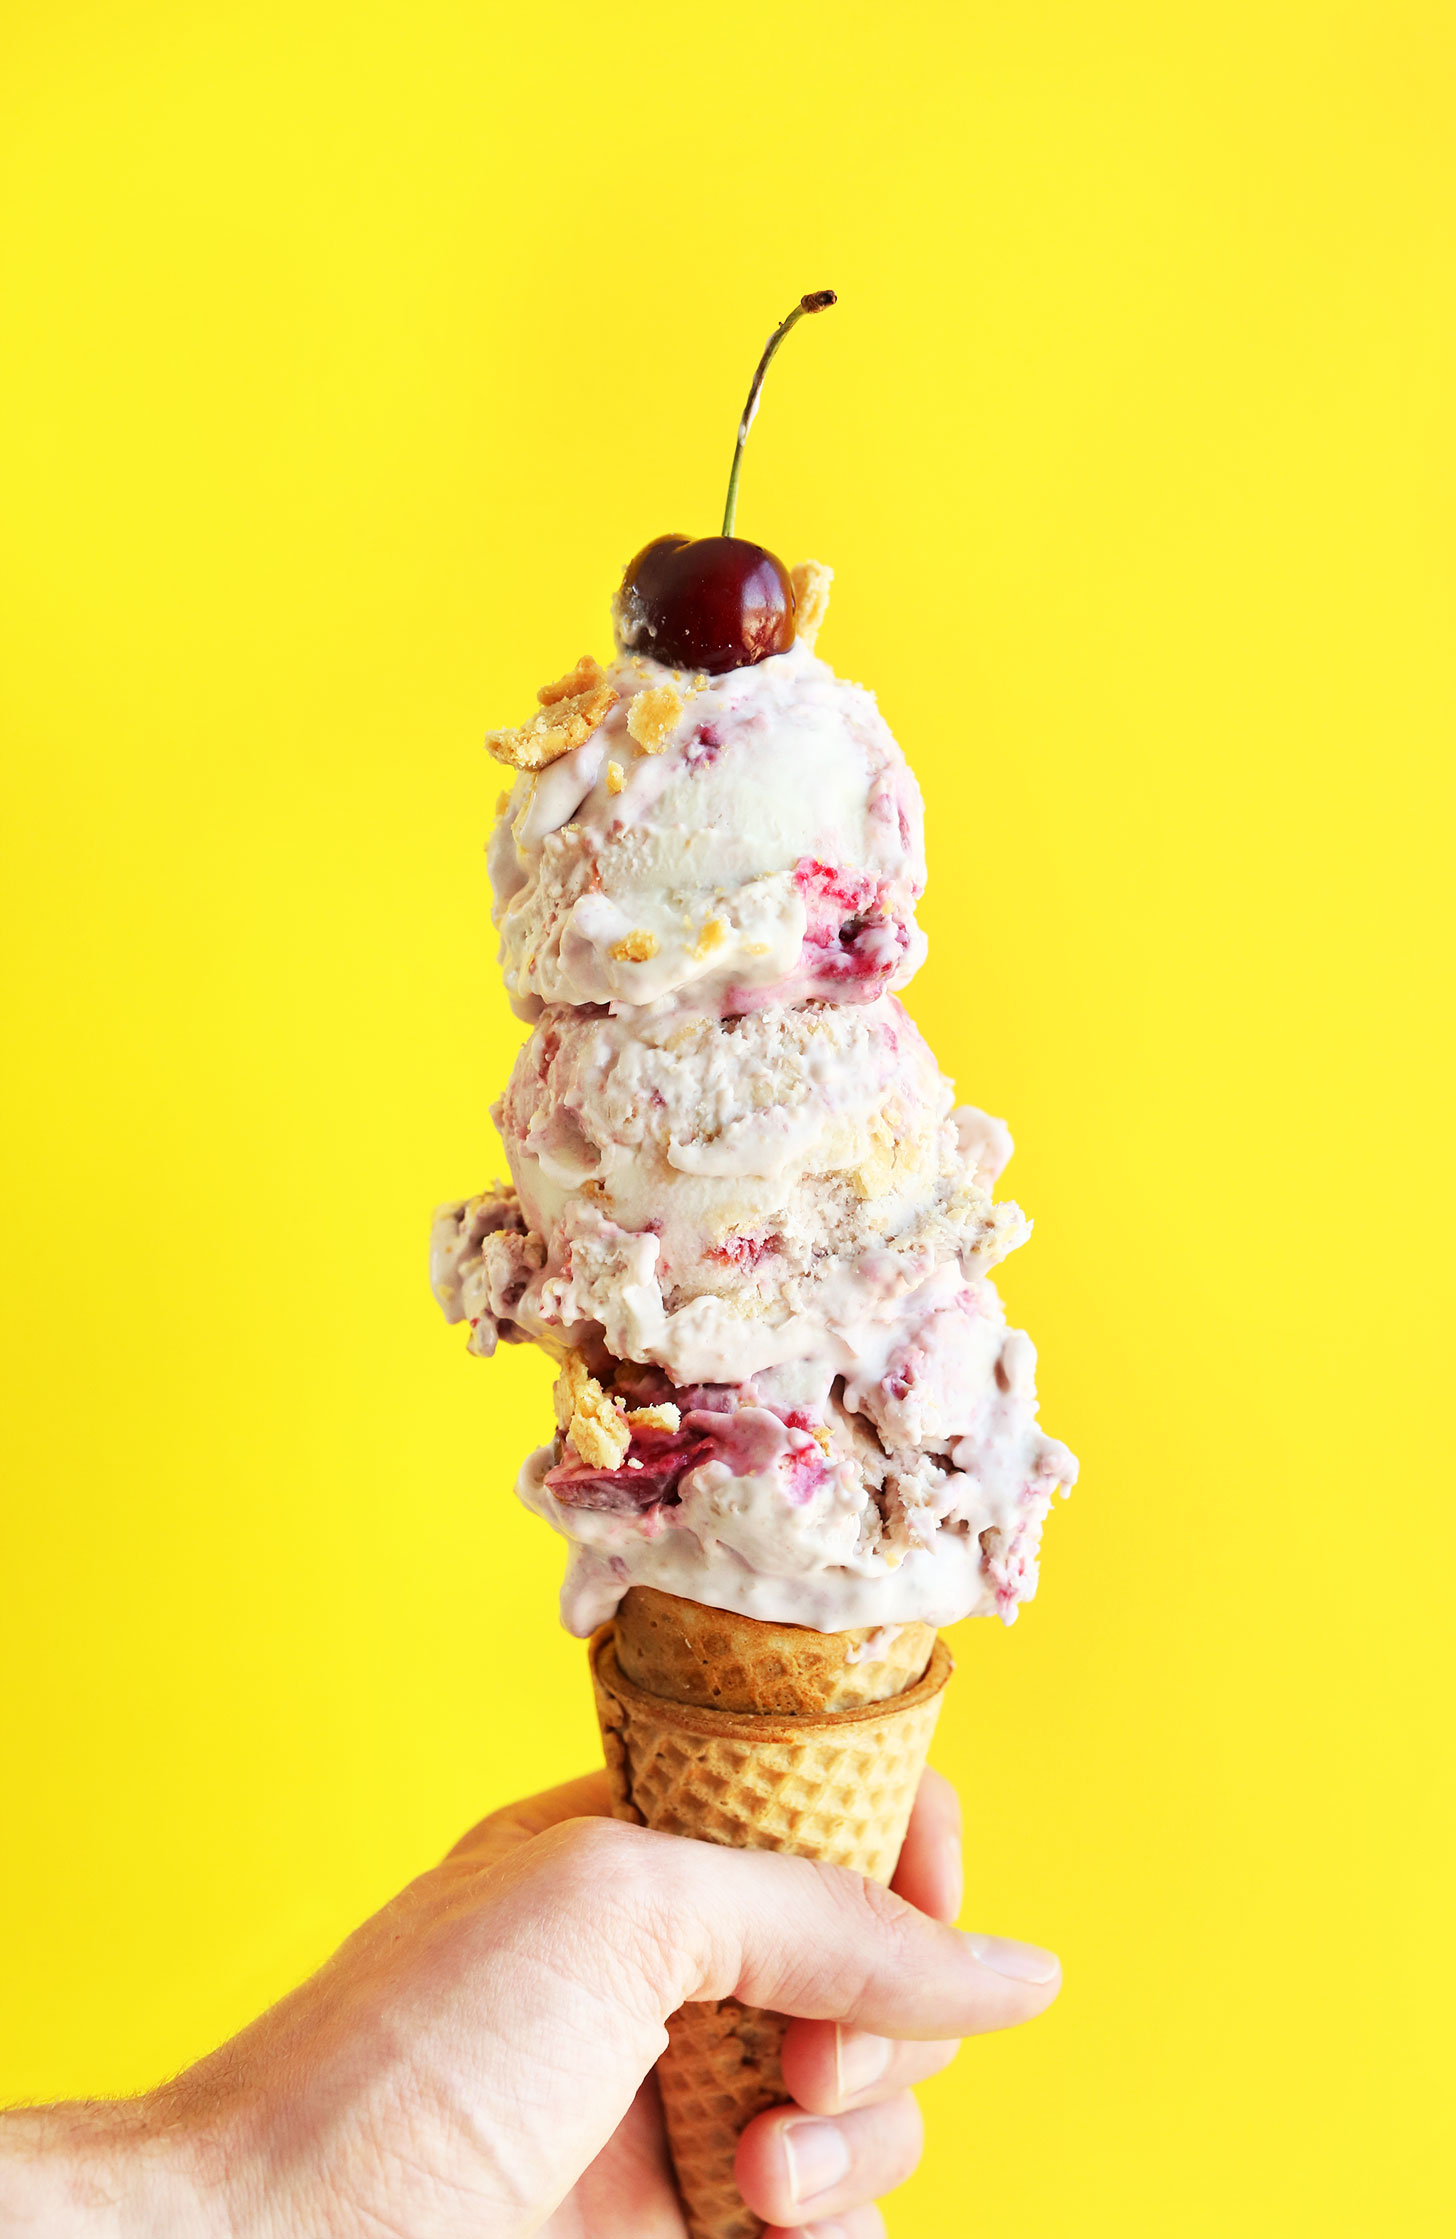 Scoops of our Vegan Cherry Pie Ice Cream on a sugar cone